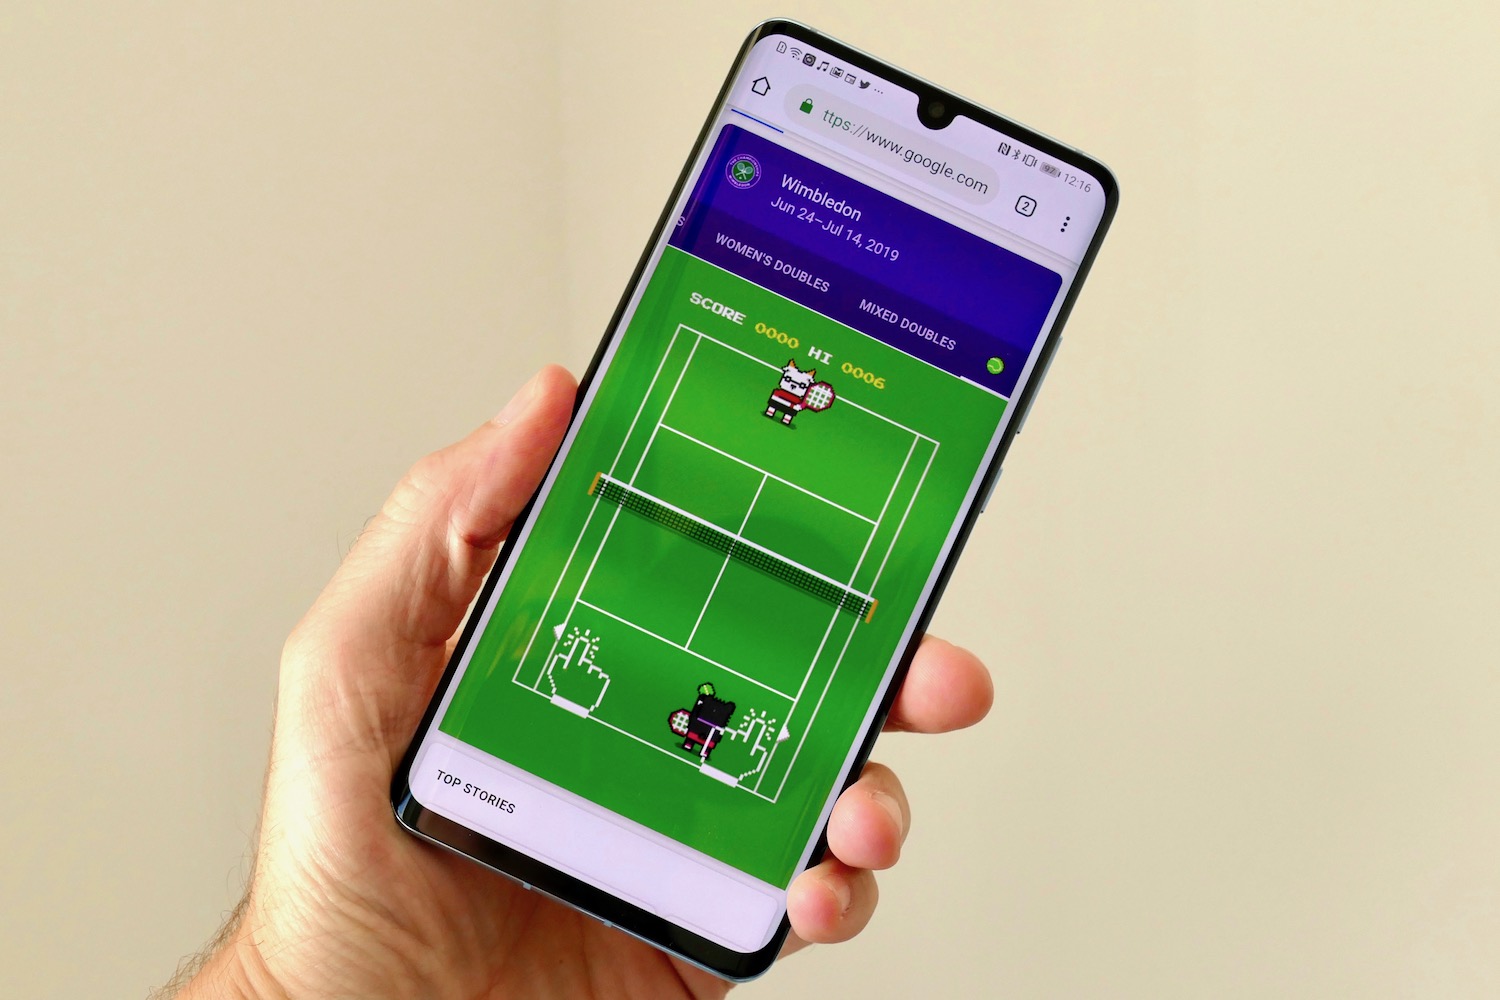 Google has a tennis mini game for us open! : r/google